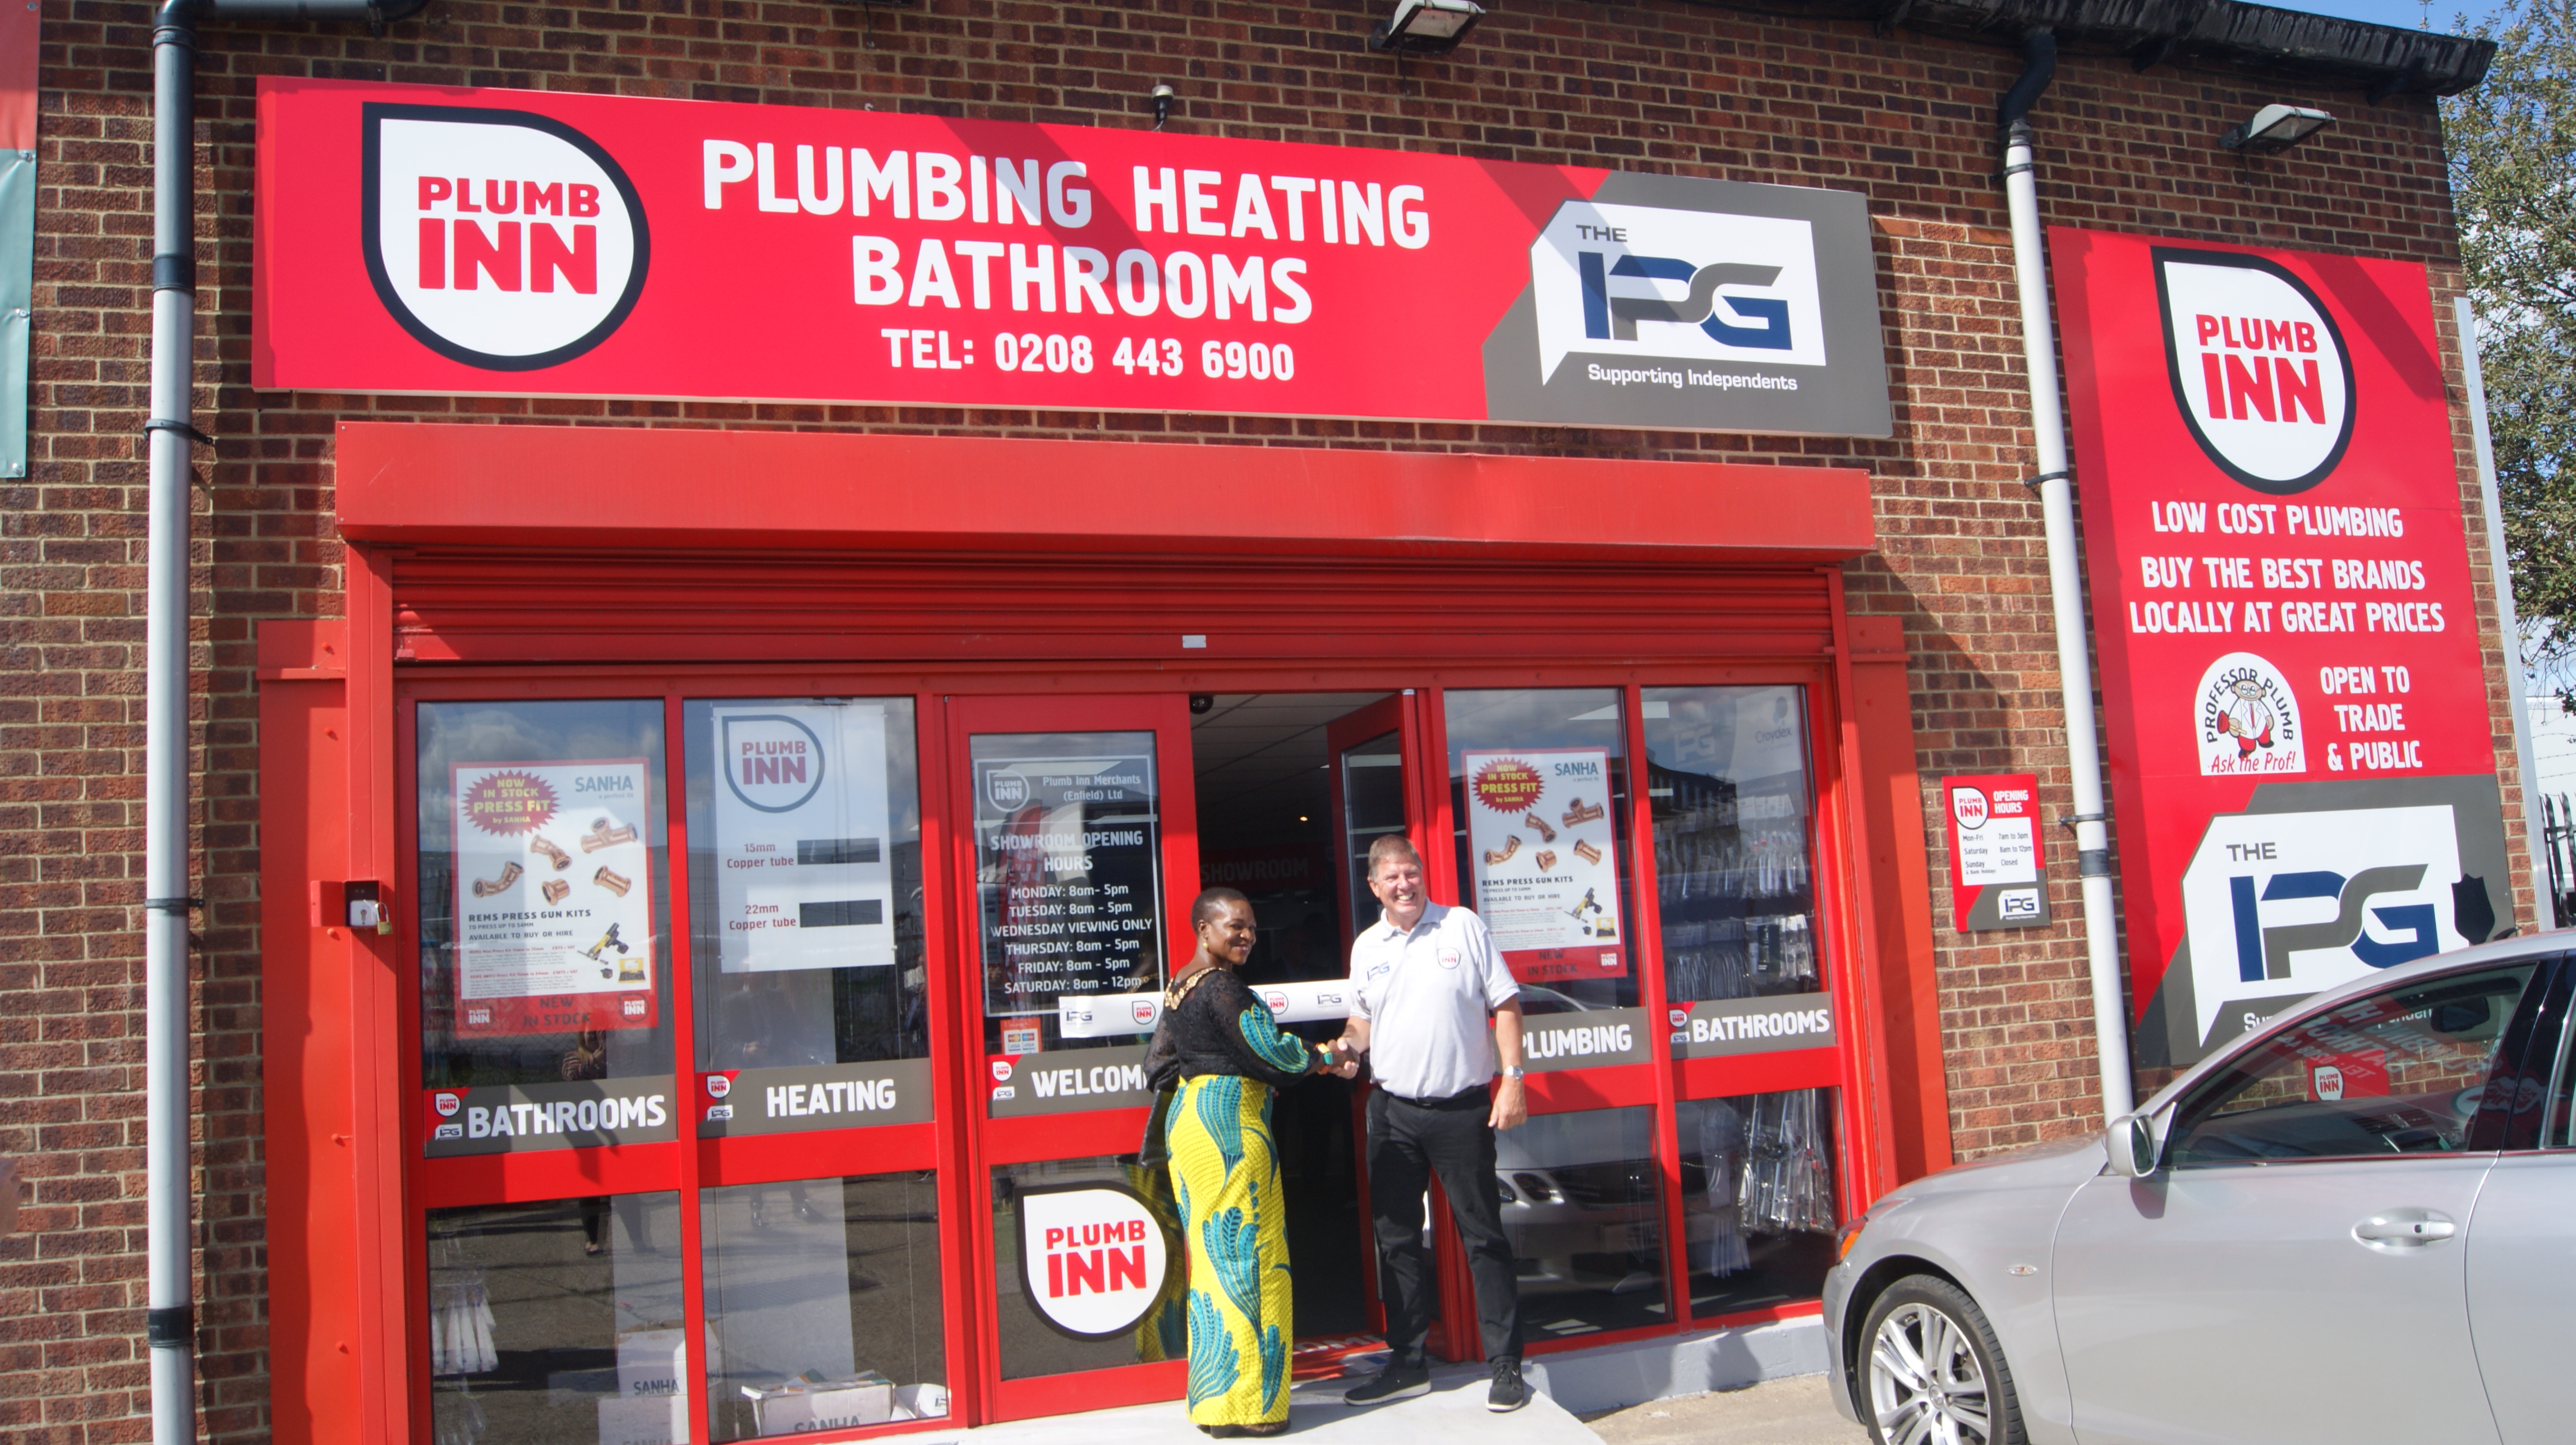 Plumb Inn successfully launch their IPG flagship store in Enfield @ipg_the